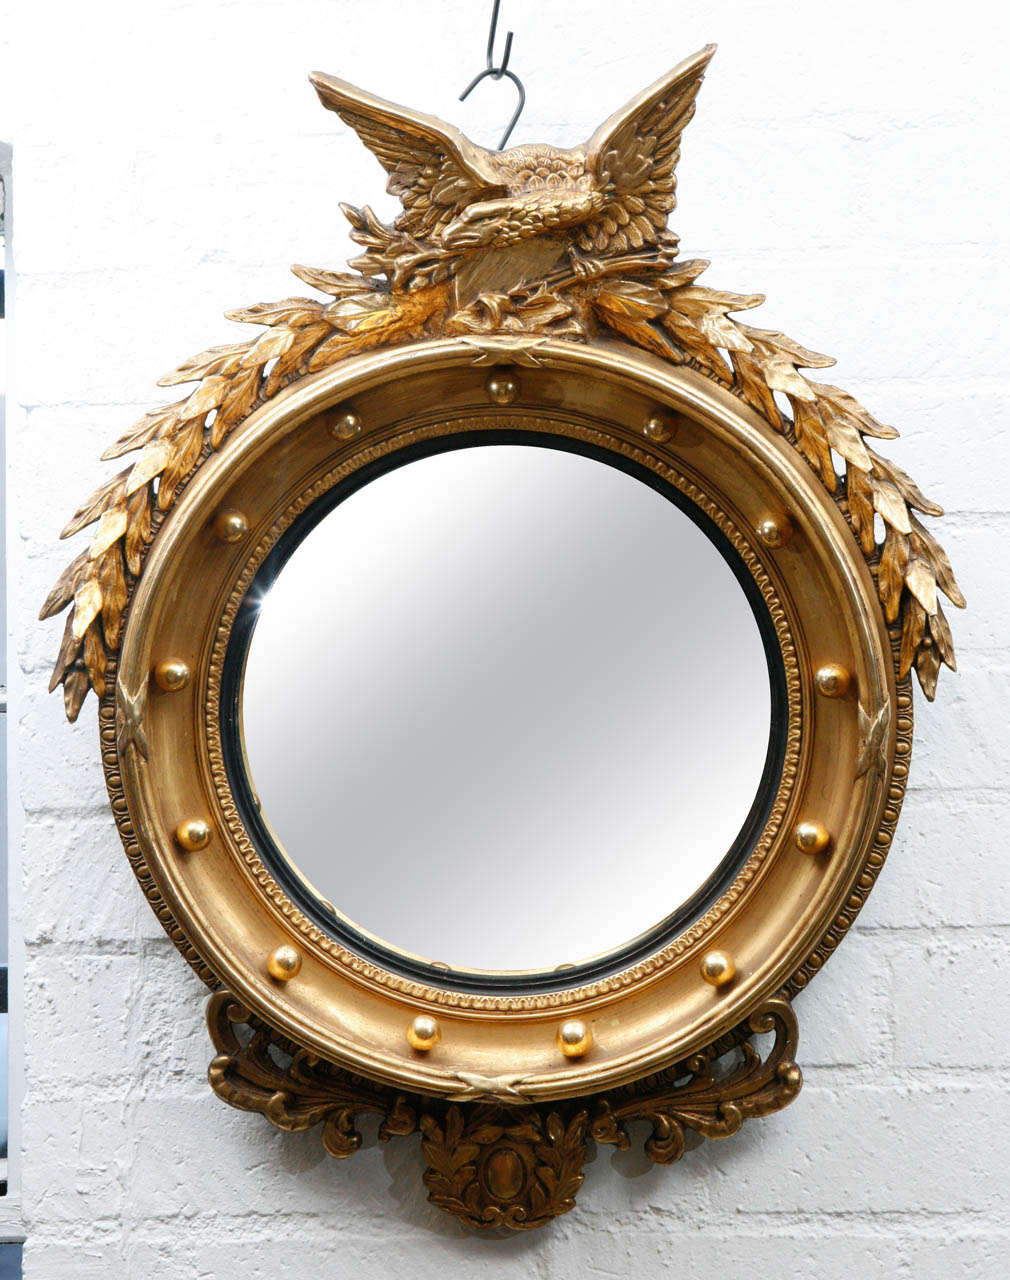 This is a splendidly handsome wall decoration has a large eagle perched on top of a convex mirror swathed in gold decorative elements that are indicative of the federal style of these style of furnishings.  This is an exemplary piece well suited for